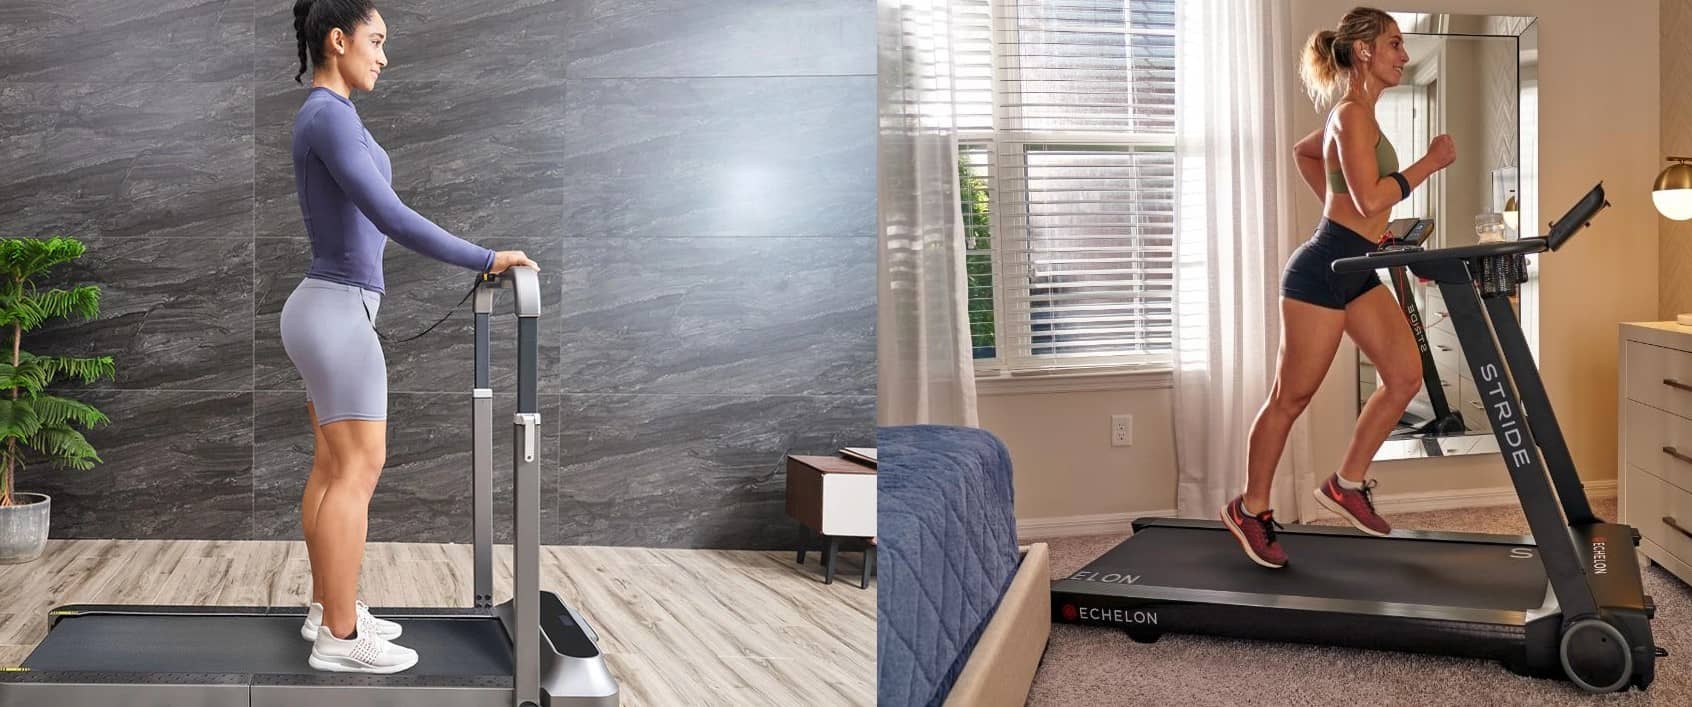 What to look for treadmill for small spaces - Astonmet